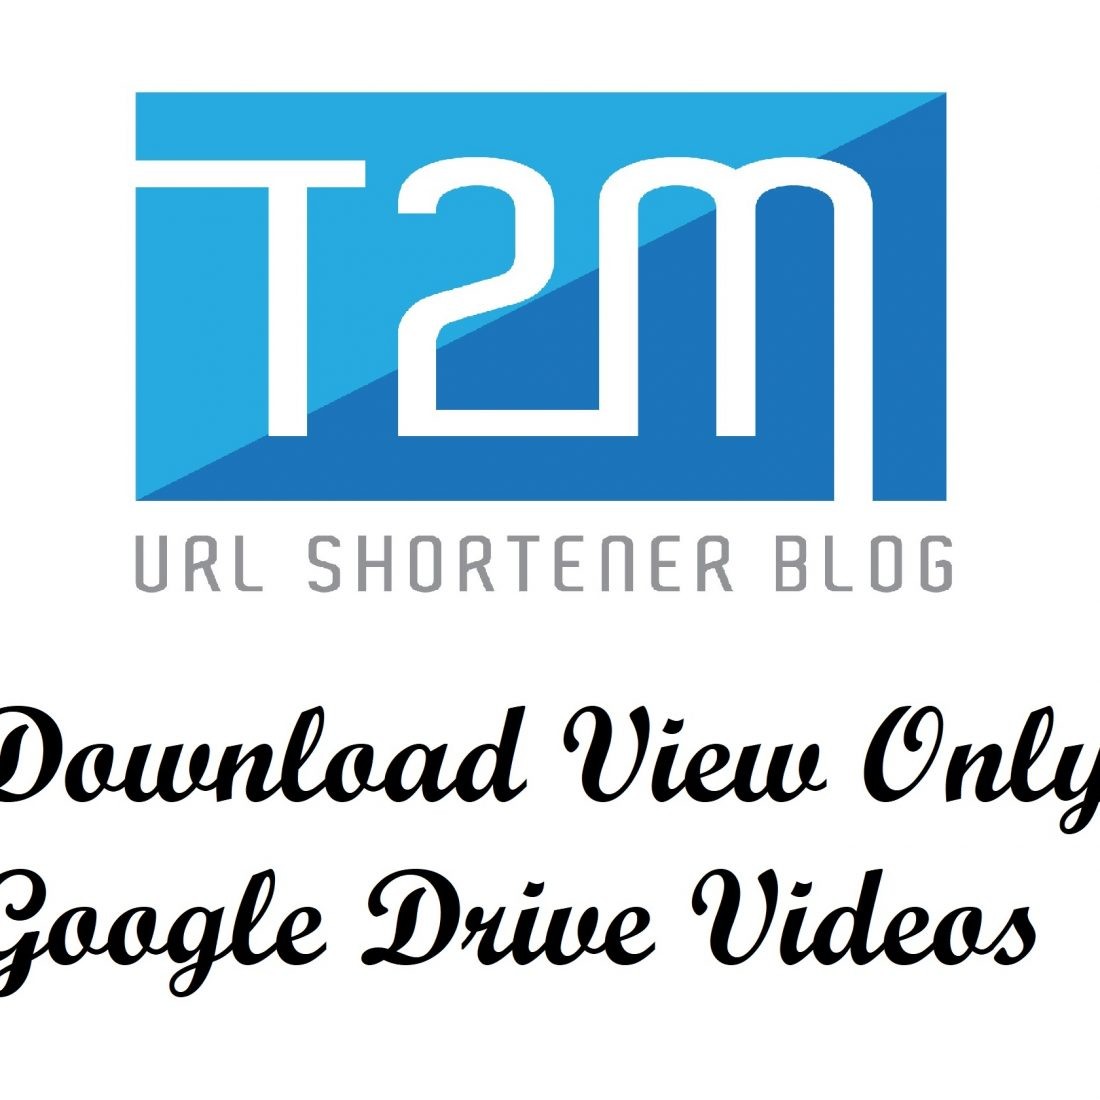 How To Download Google Drive Protected View Only Videos?